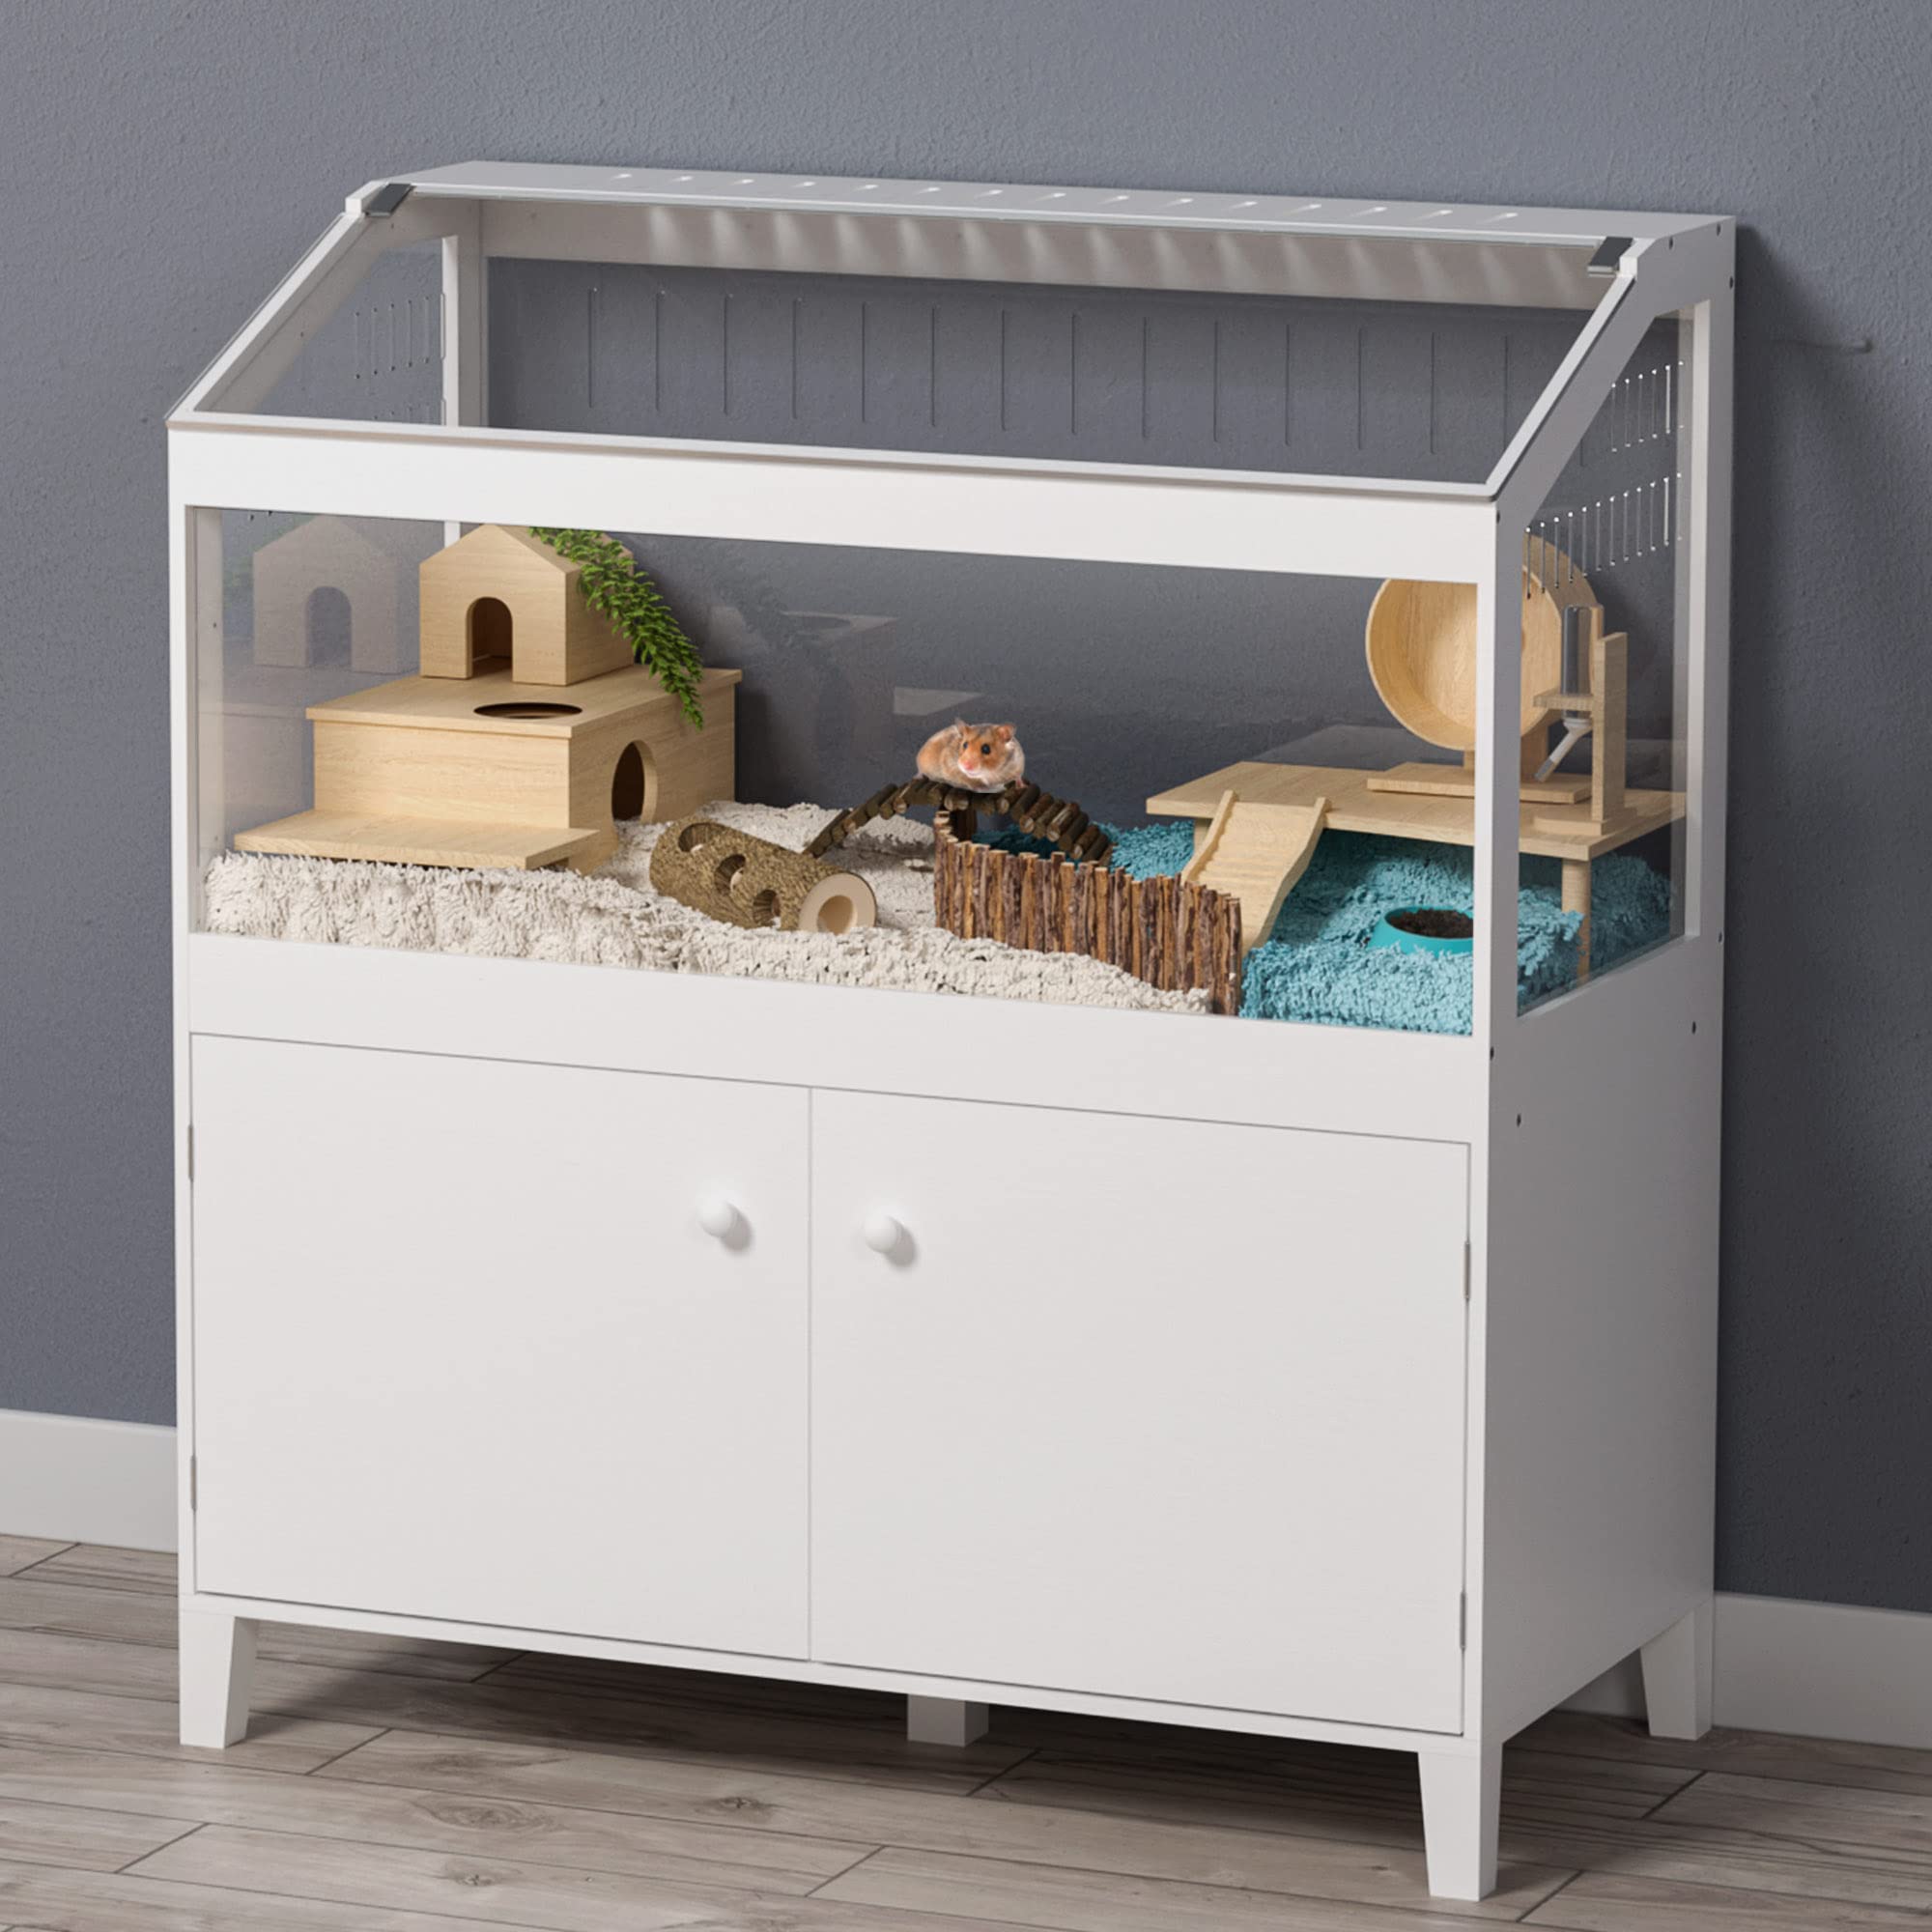 GDLF Furniture Style Hamster Cage